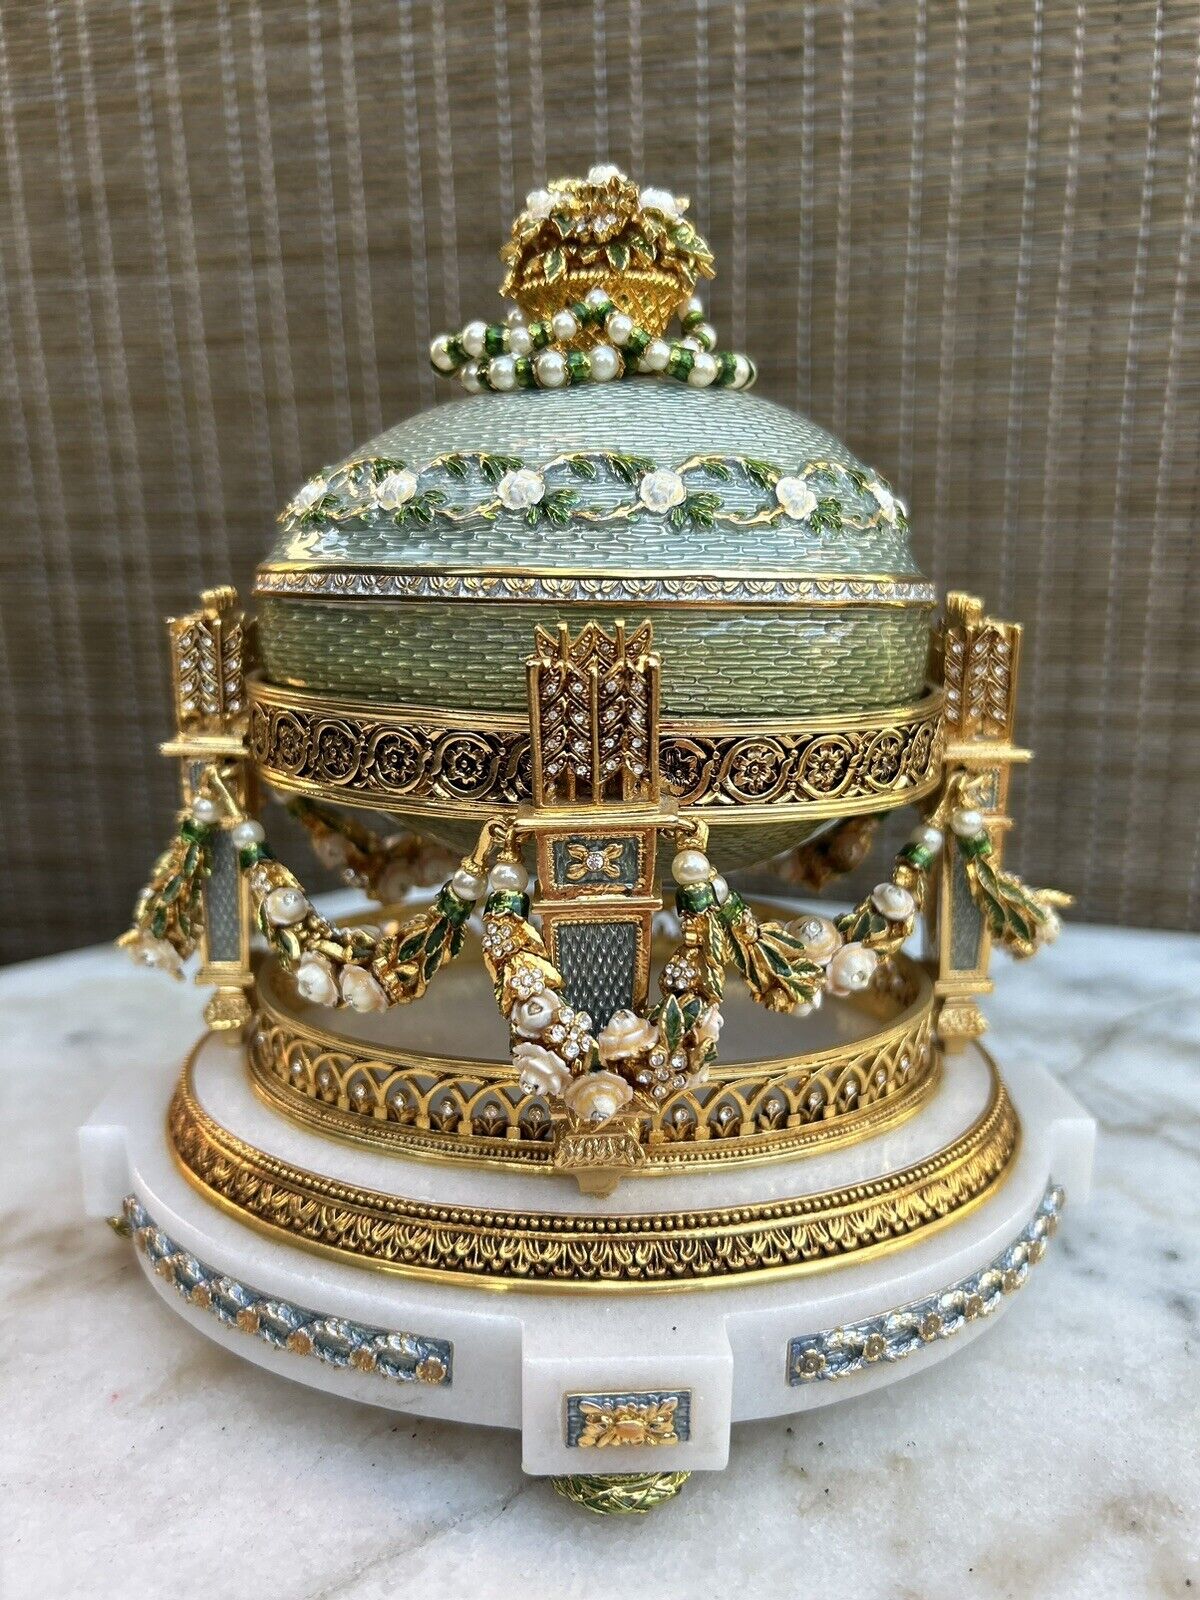 Authentic Imperial Faberge Cradle Of Garlands Egg (Trophy Egg)